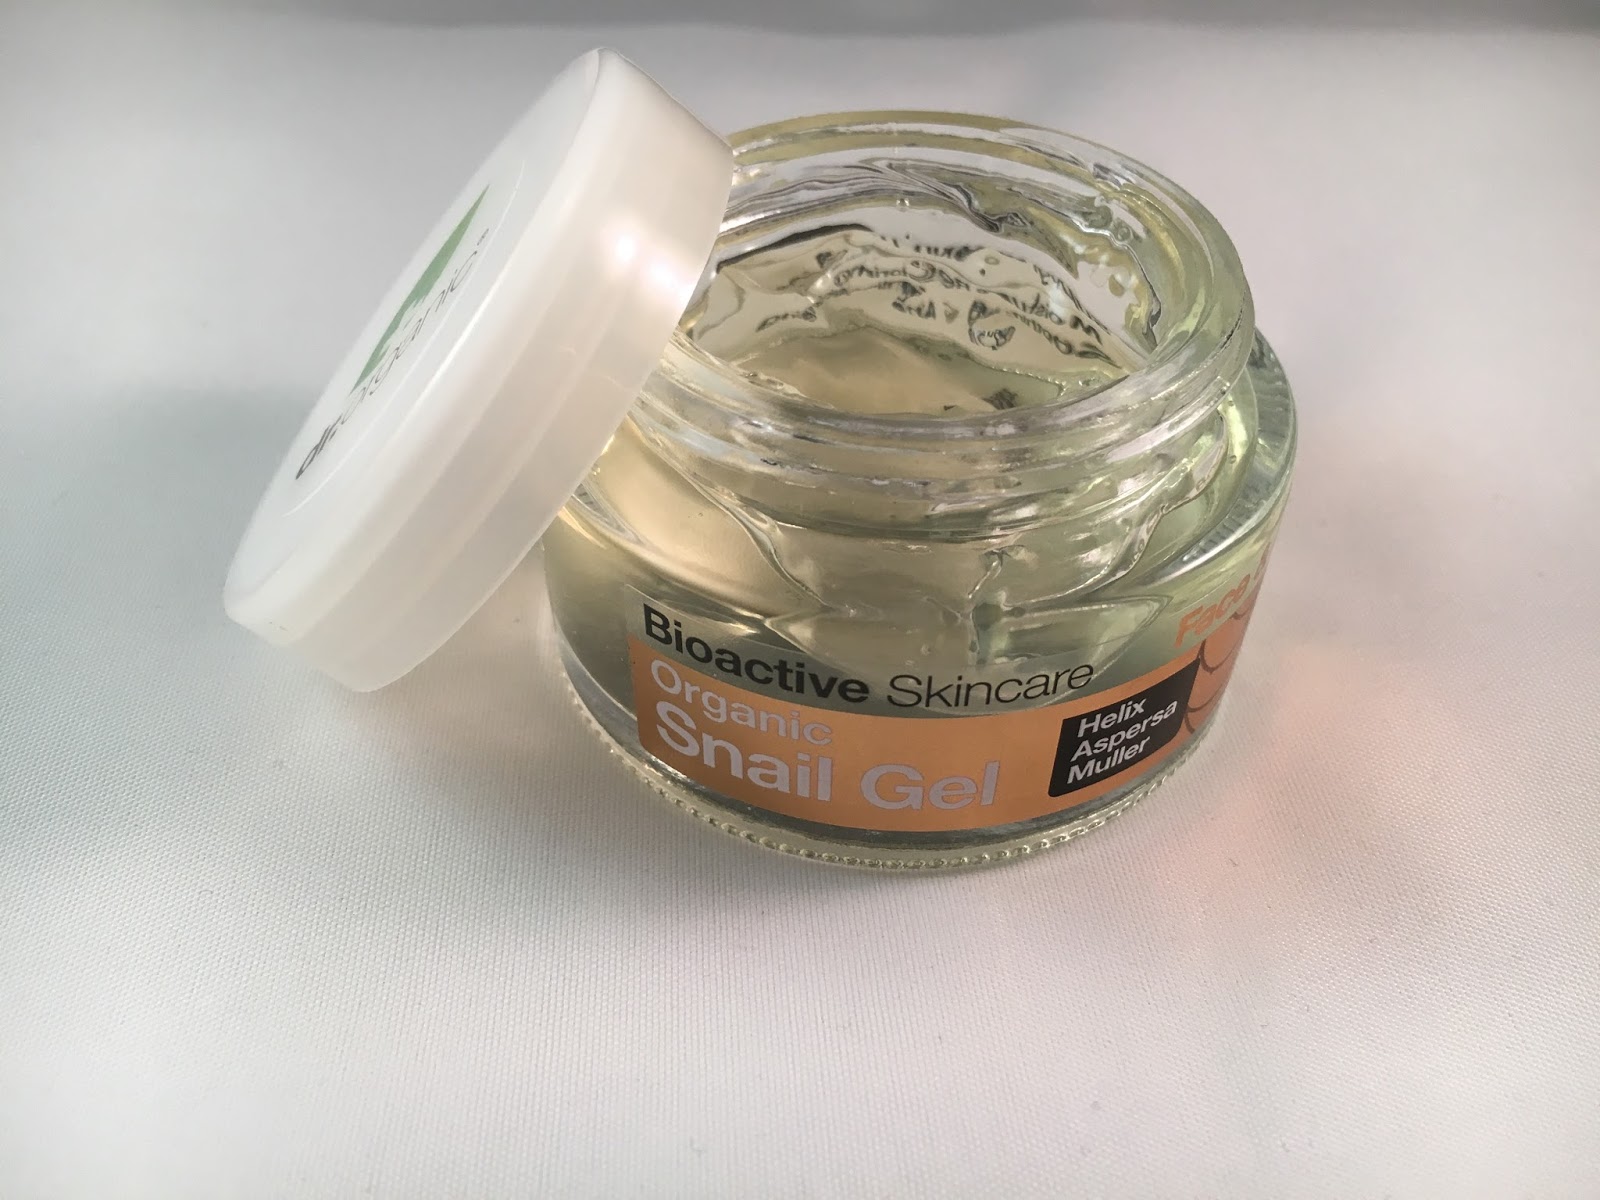 Dr. Organic's Snail Gel holy anti-ageing, moisturising, regenerating and soothing